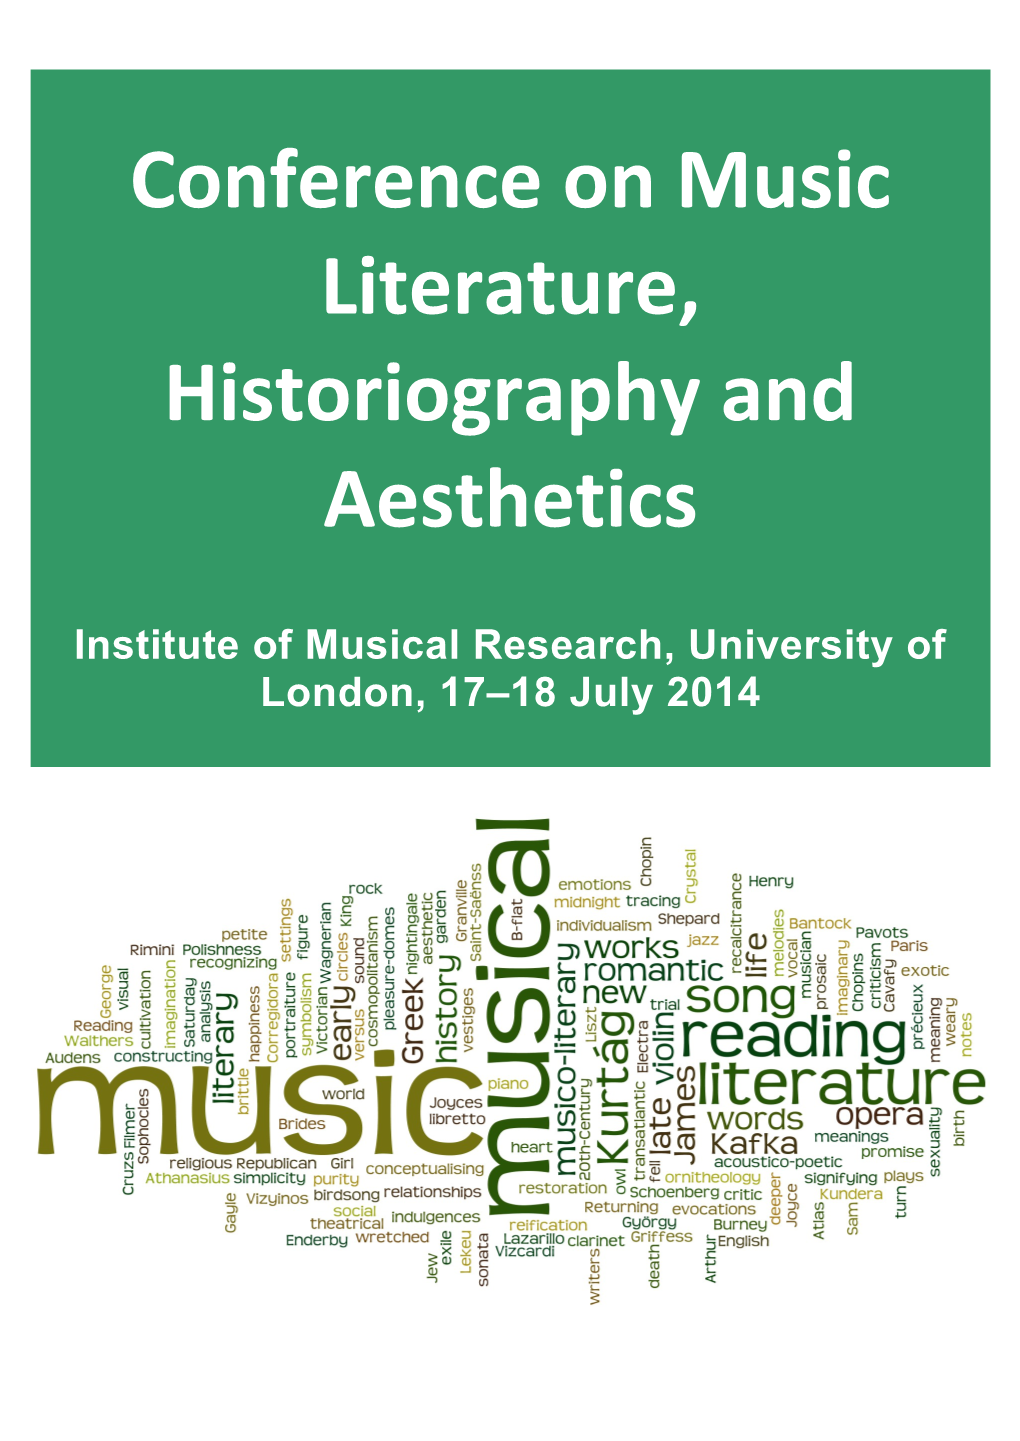 Conference on Music Literature, Historiography and Aesthetics